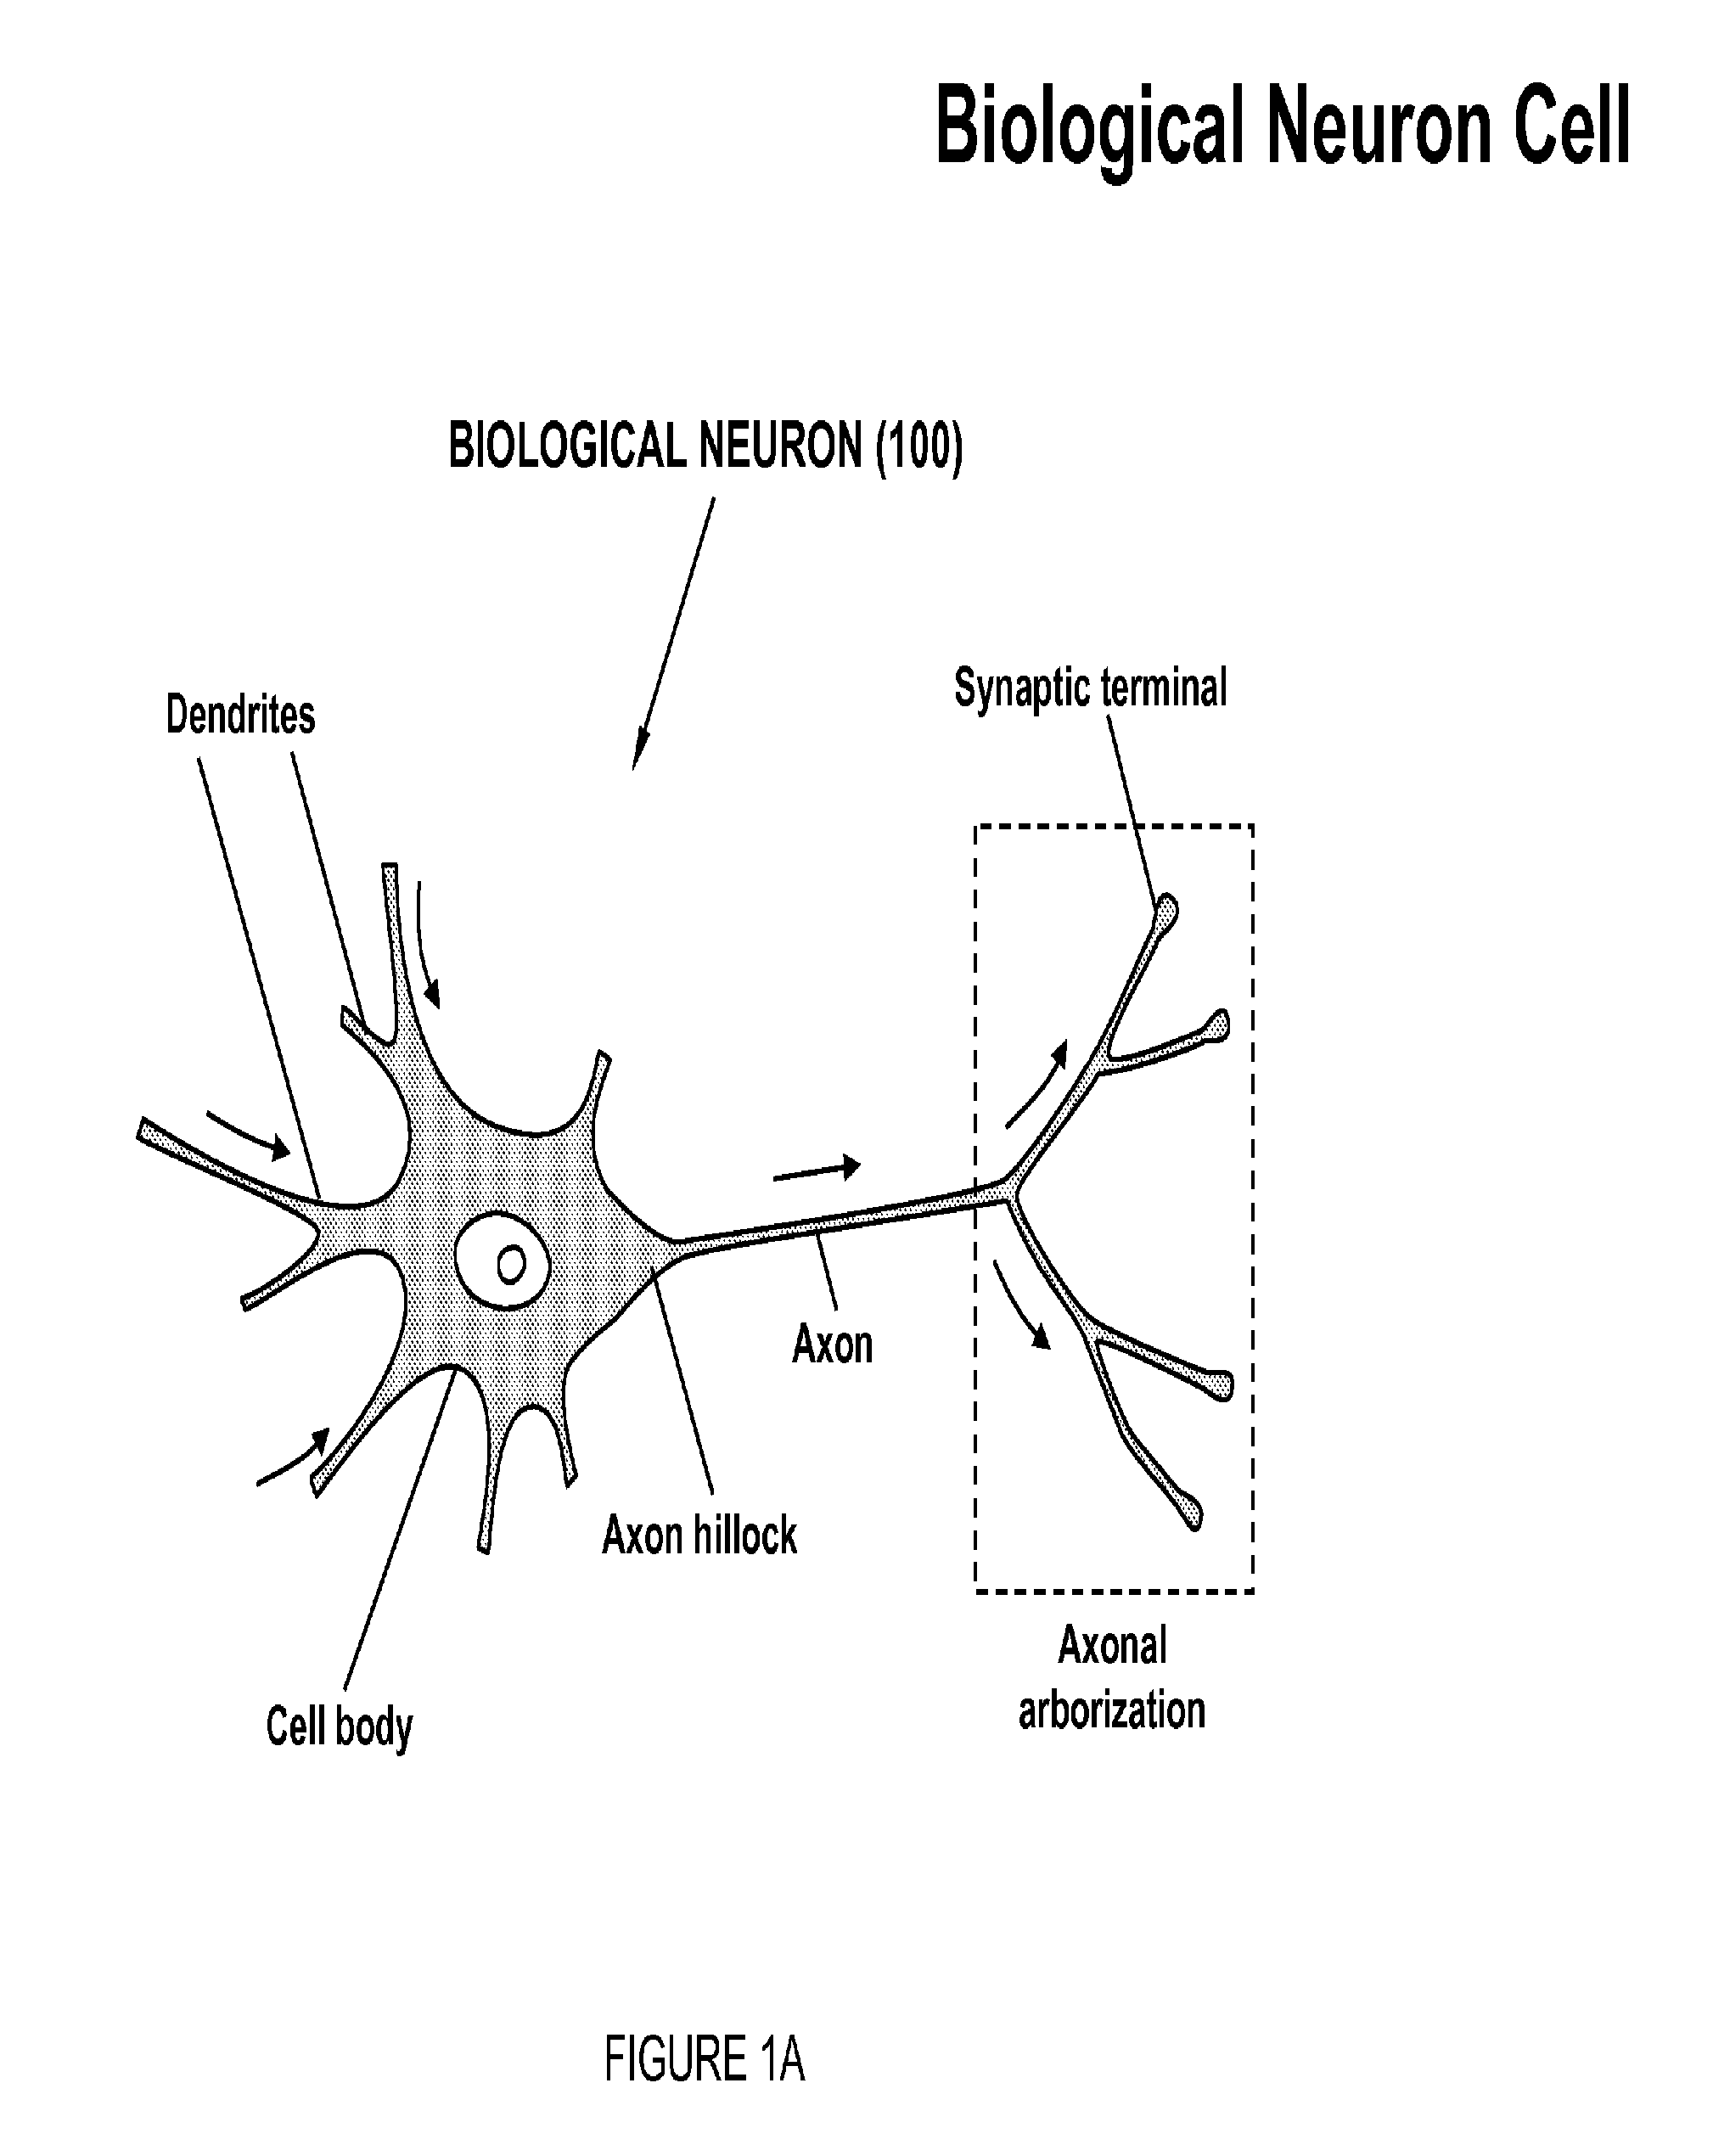 Carbon nanotube-based neural networks and methods of making and using same